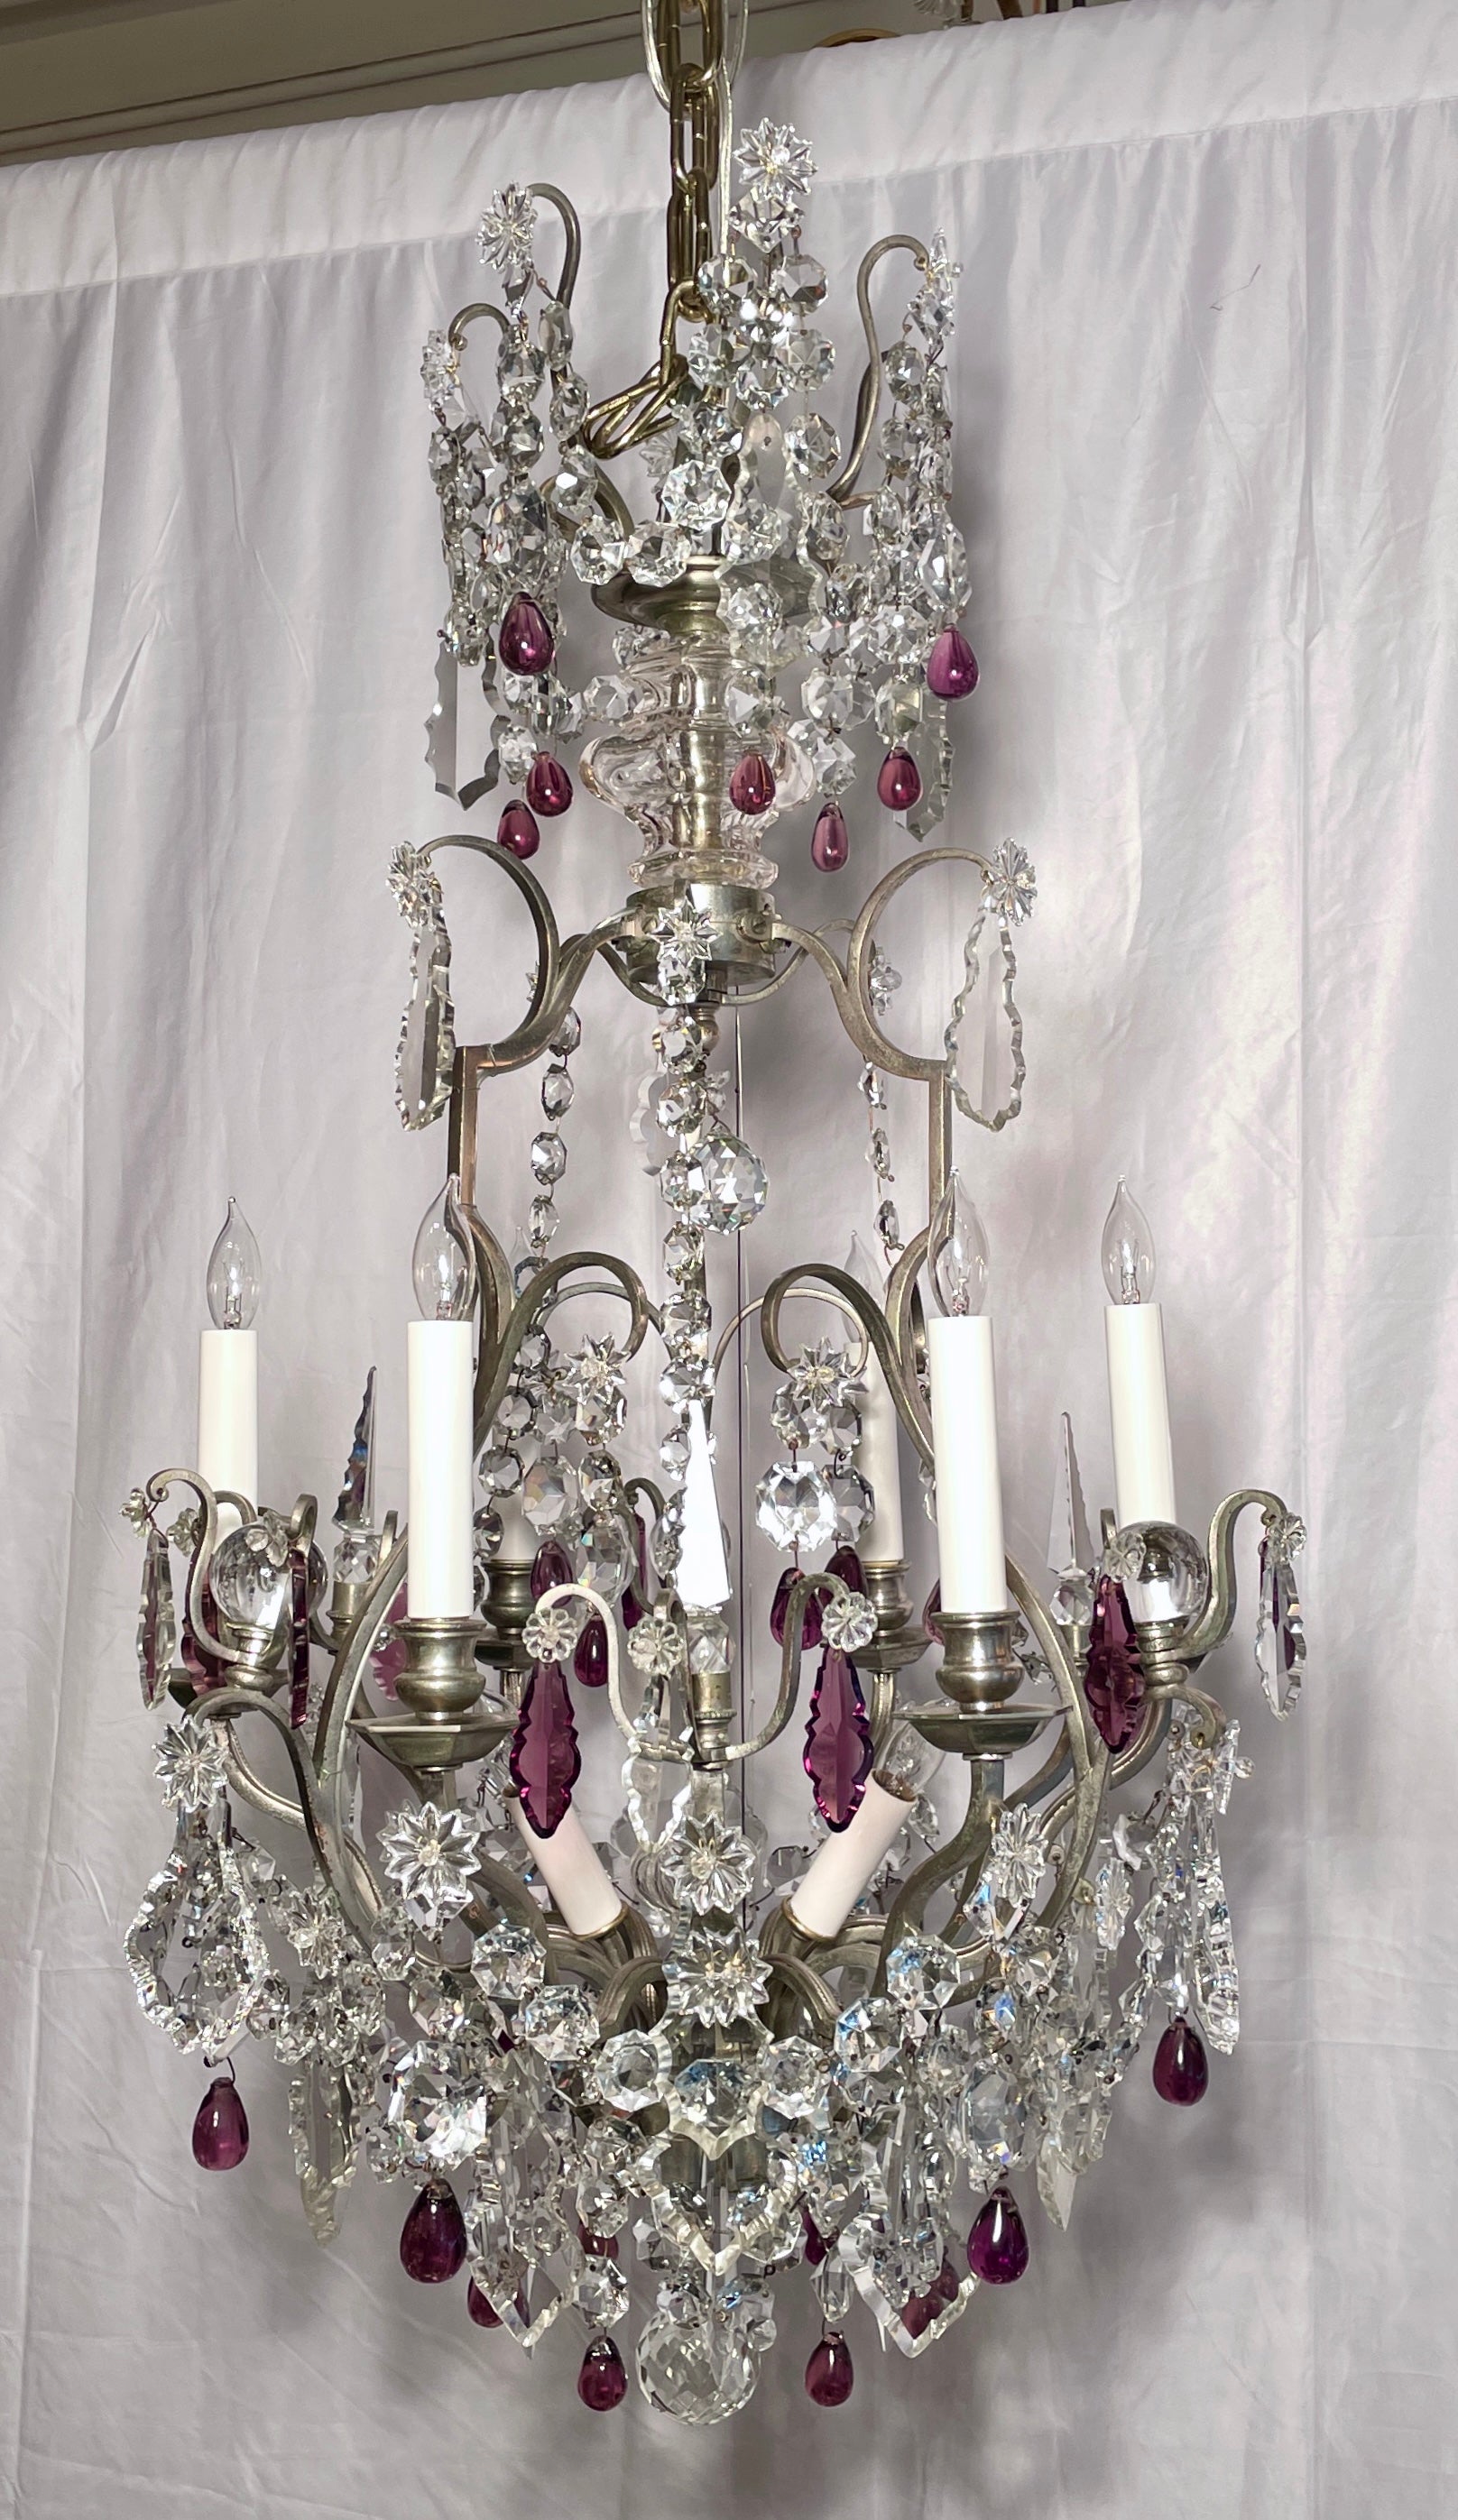 Antique French Crystal and Silver on Bronze 9-Light Chandelier, Circa 1890-1910